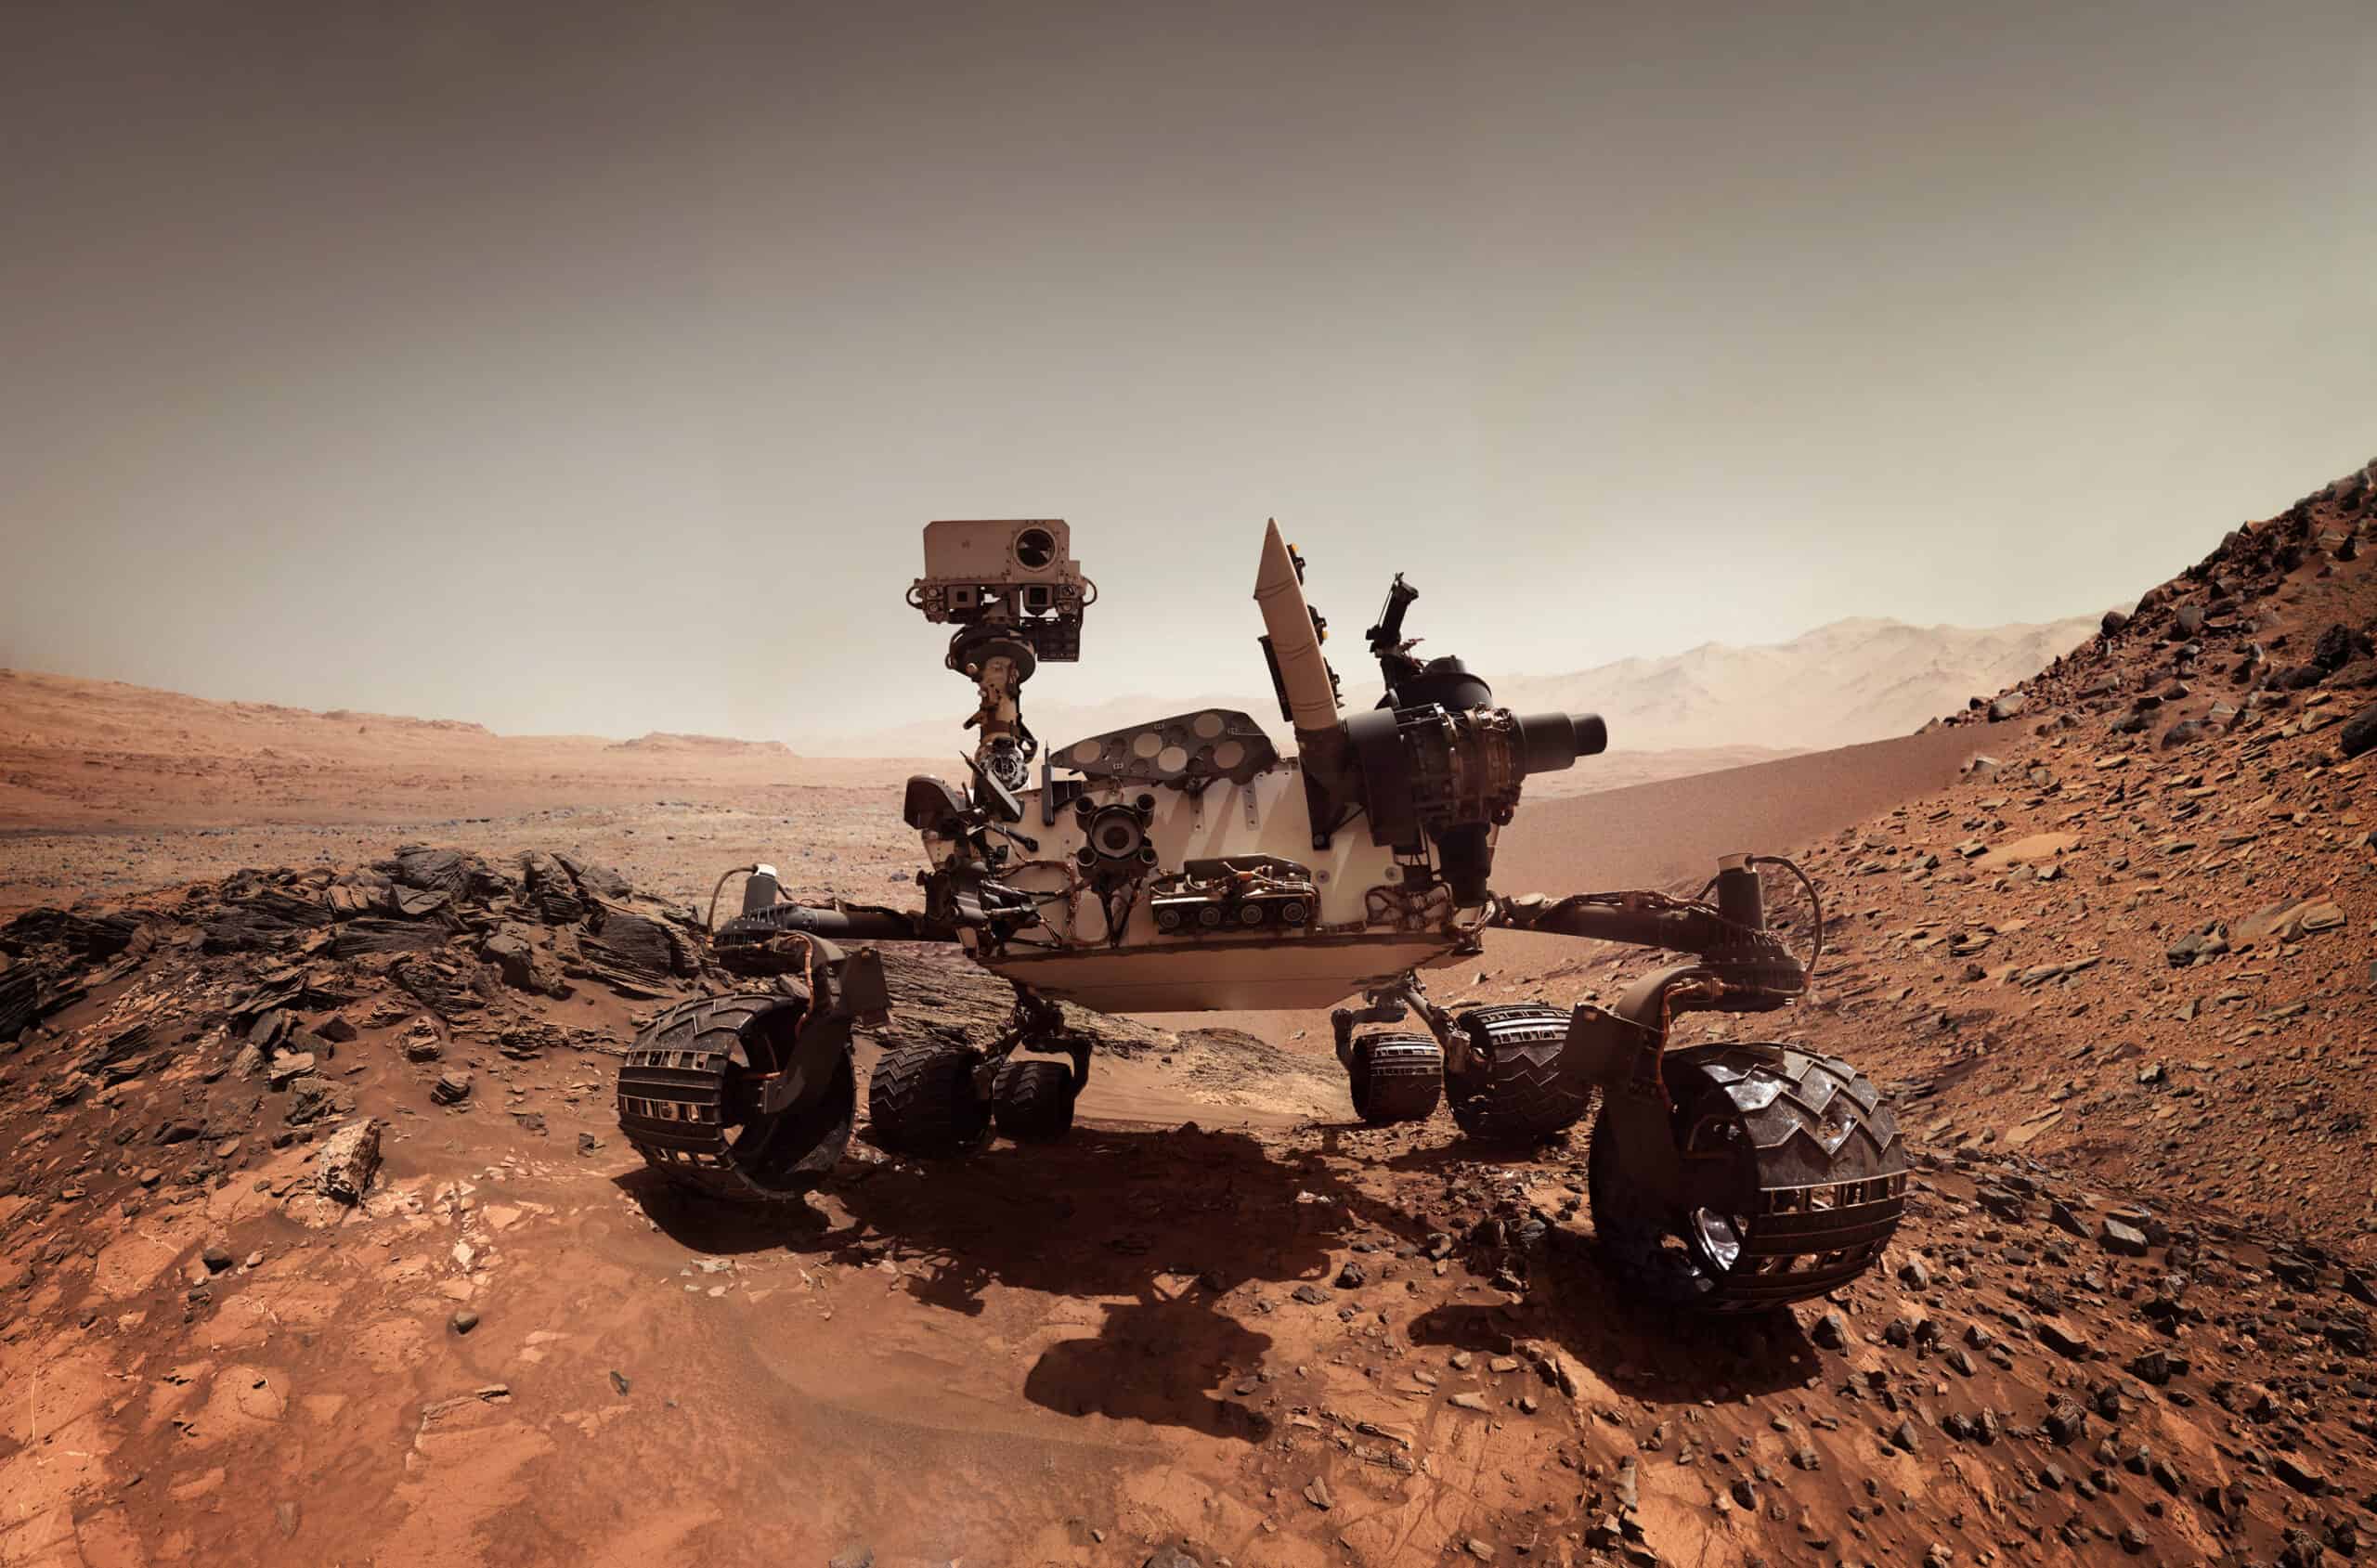 Mars,Rover.,Elements,Of,This,Image,Furnished,By,Nasa